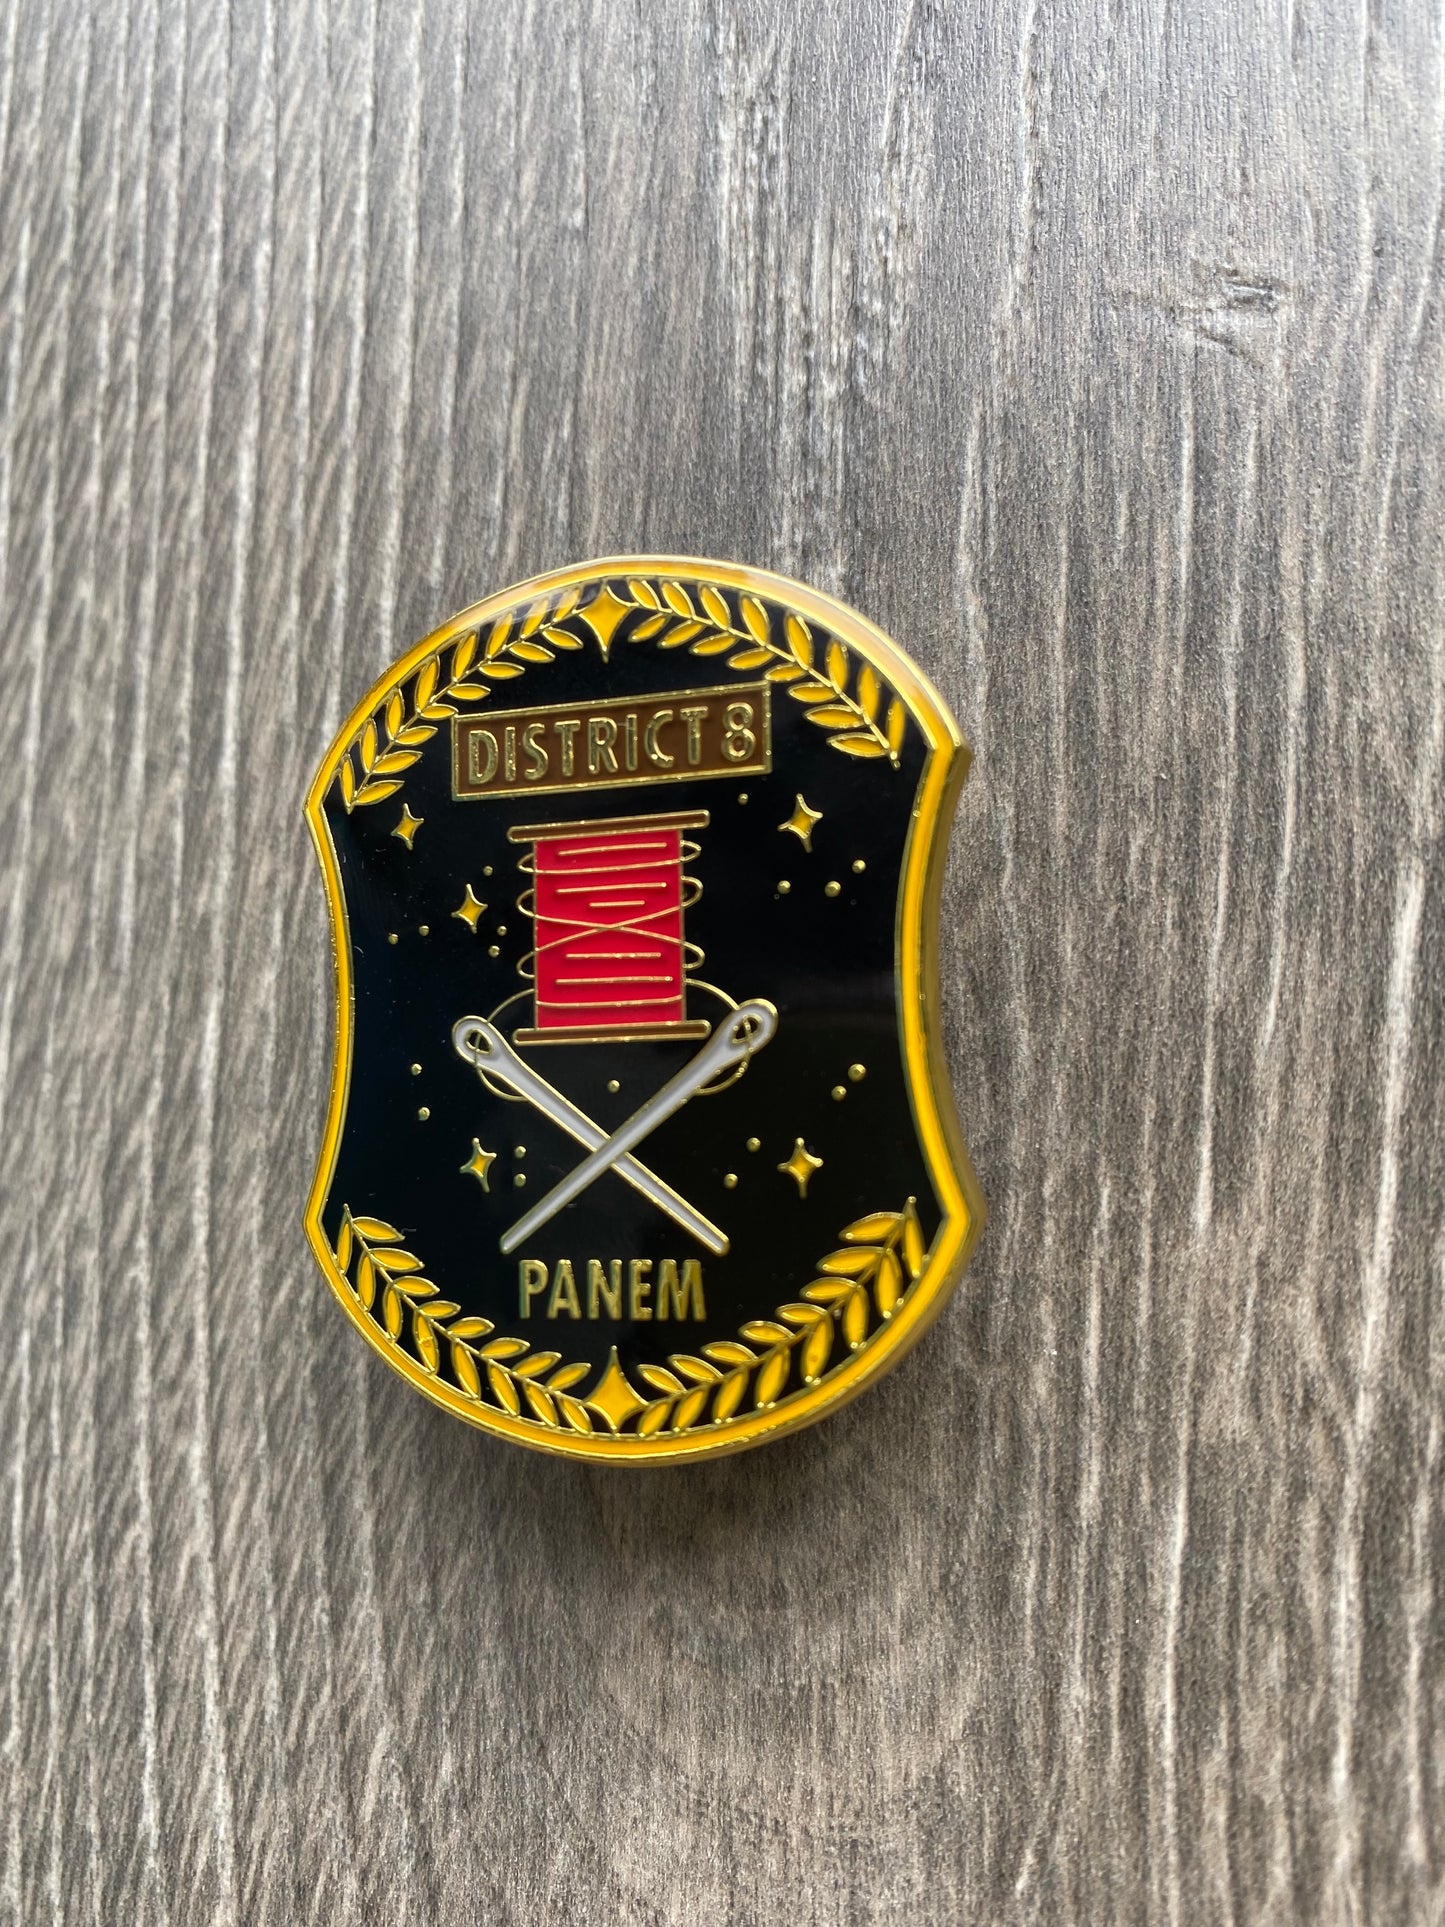 District 8 The Hunger Games Enamel Pin